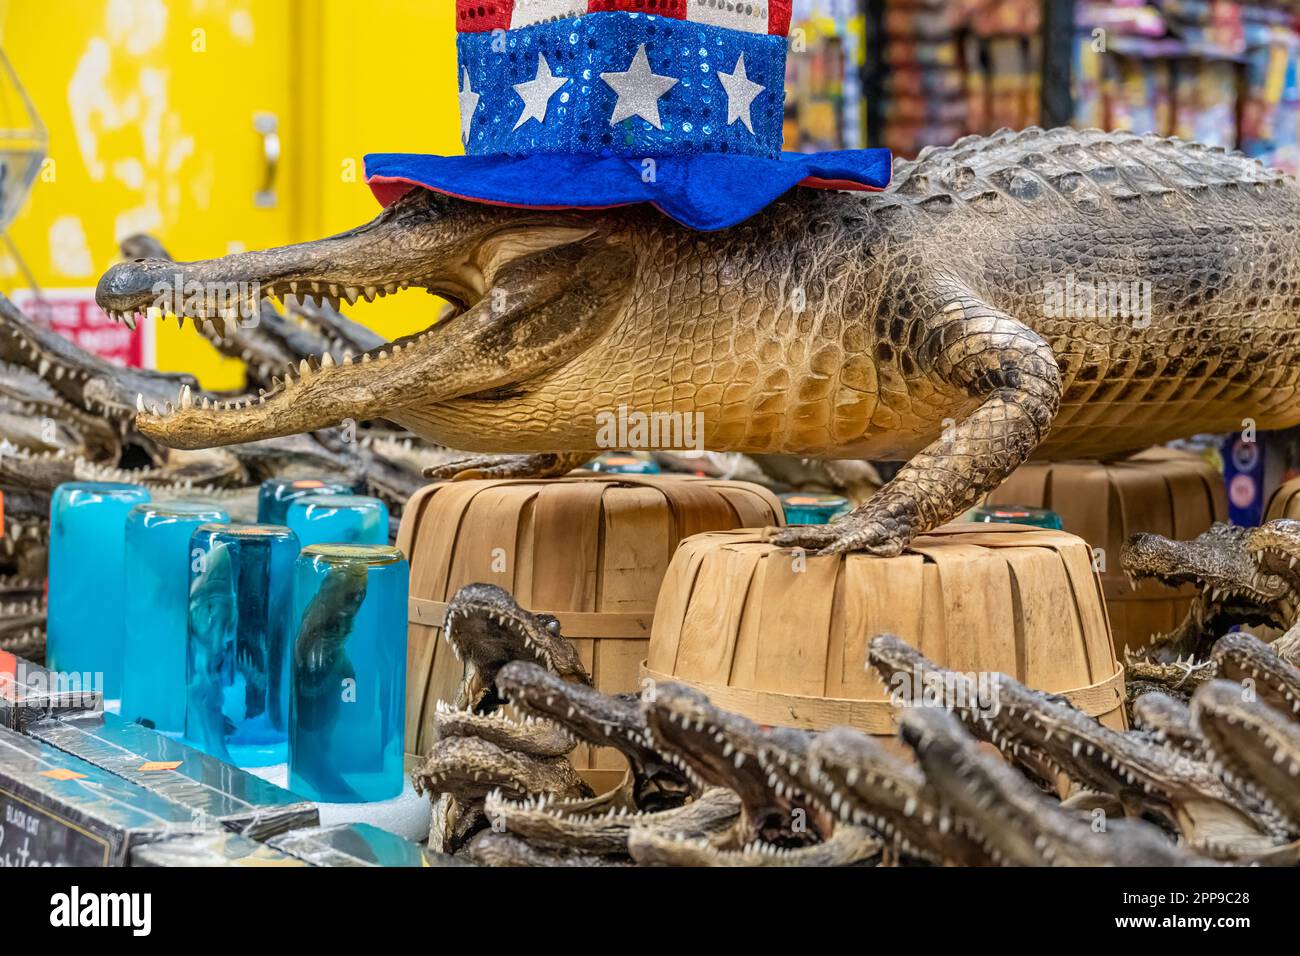 Florida souvenir alligator heads and a stuffed alligator with an Uncle Sam hat in front of a wall of fireworks at The Nuthouse in St. Augustine, FL. Stock Photo